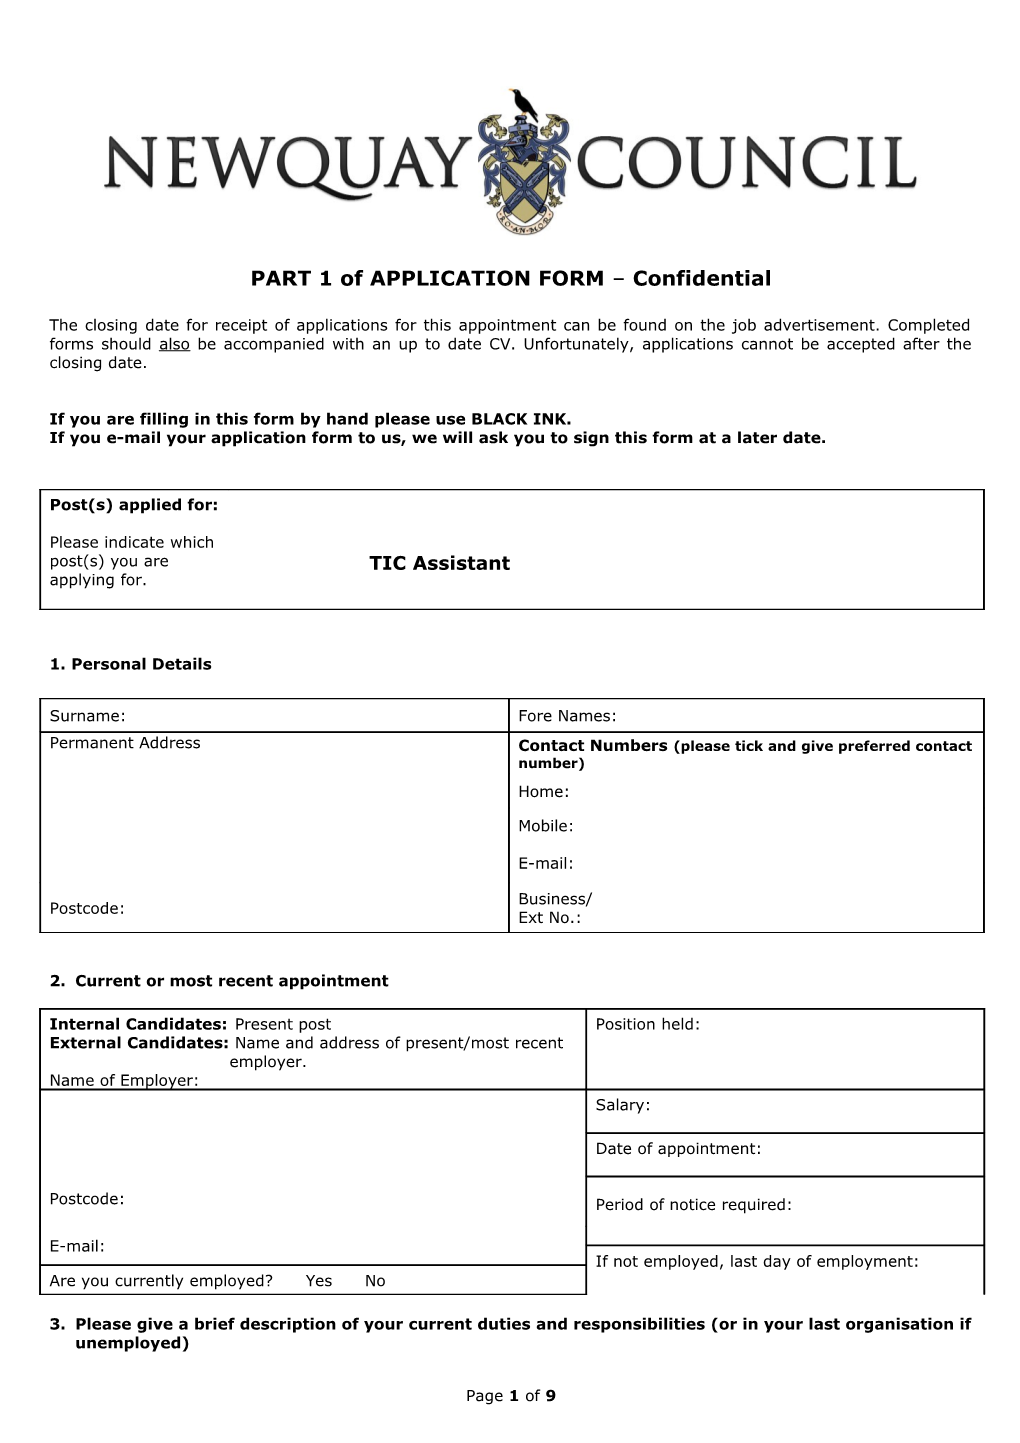 Draft Equal Opportunities Monitoring Form